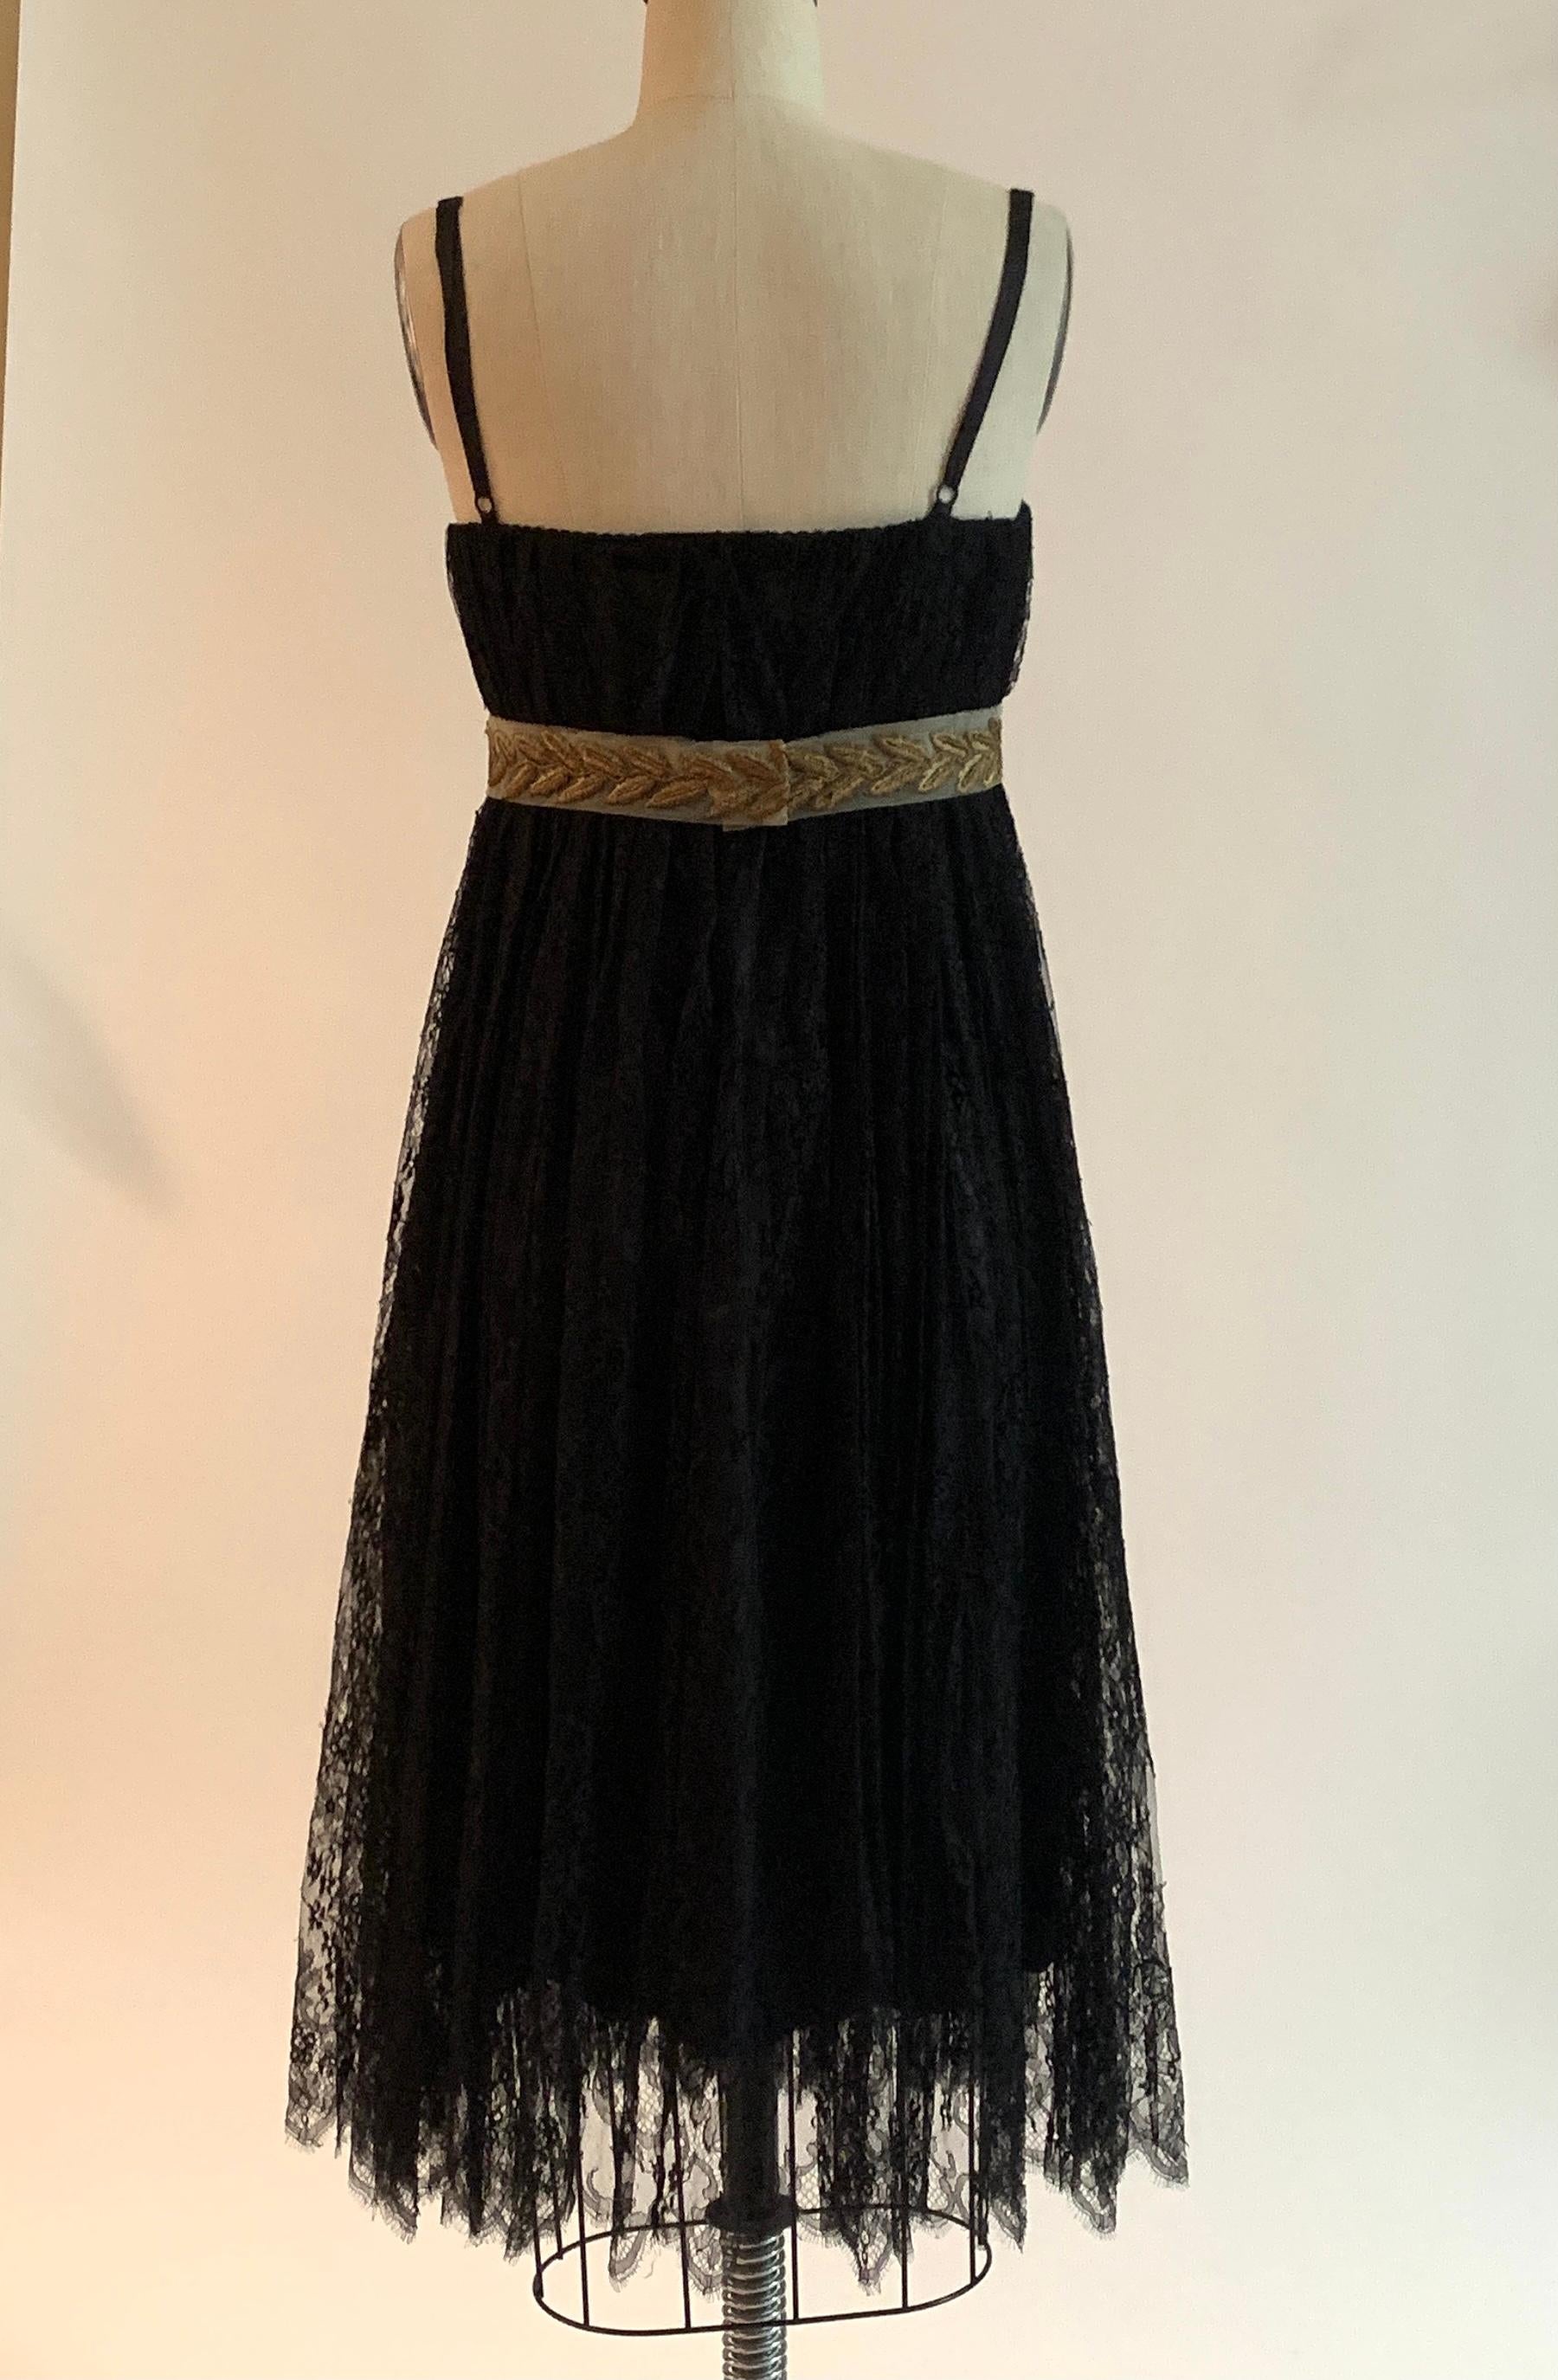 Dolce and Gabbana Unworn 2006 Black Lace Dress with Gold Laurel Trim Ad ...